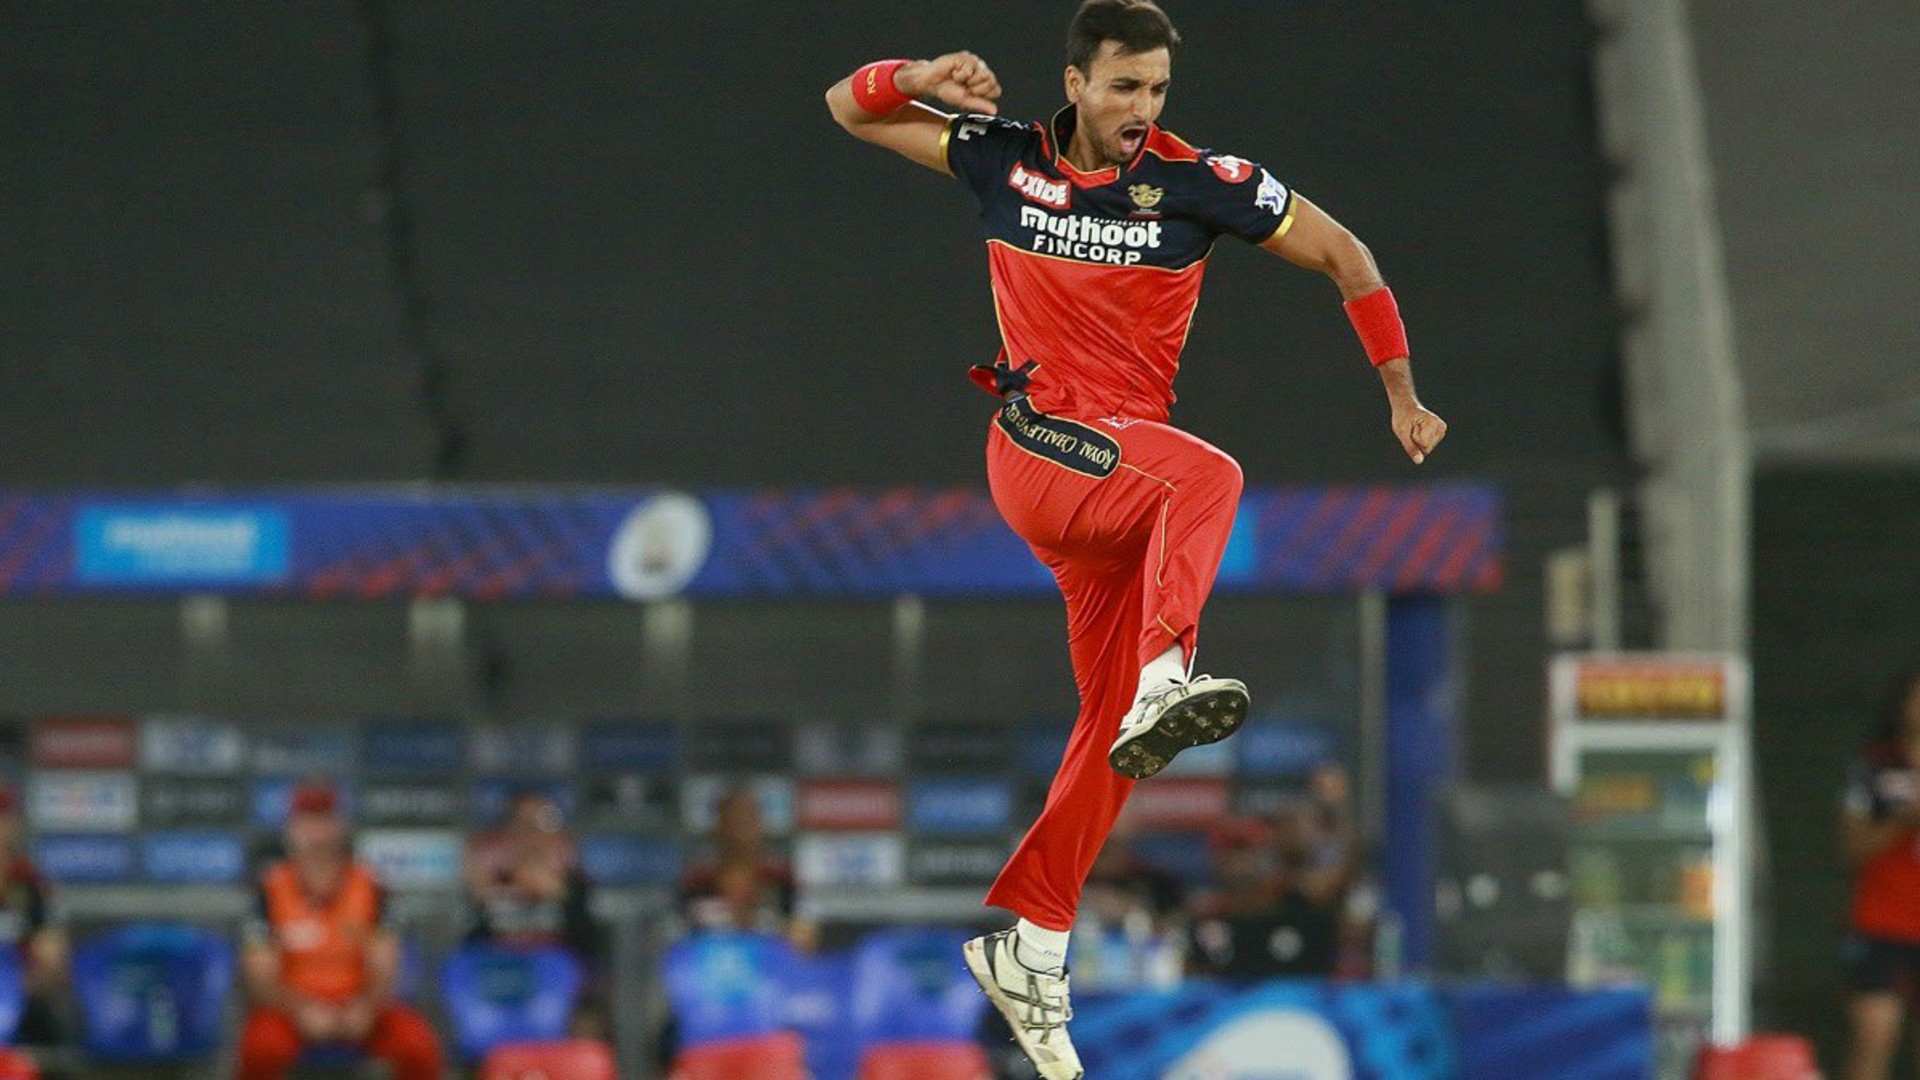 Harshal Patel has picked the most wickets in IPL 2021 so far. (Image Credit: Twitter/@RCBTweets)